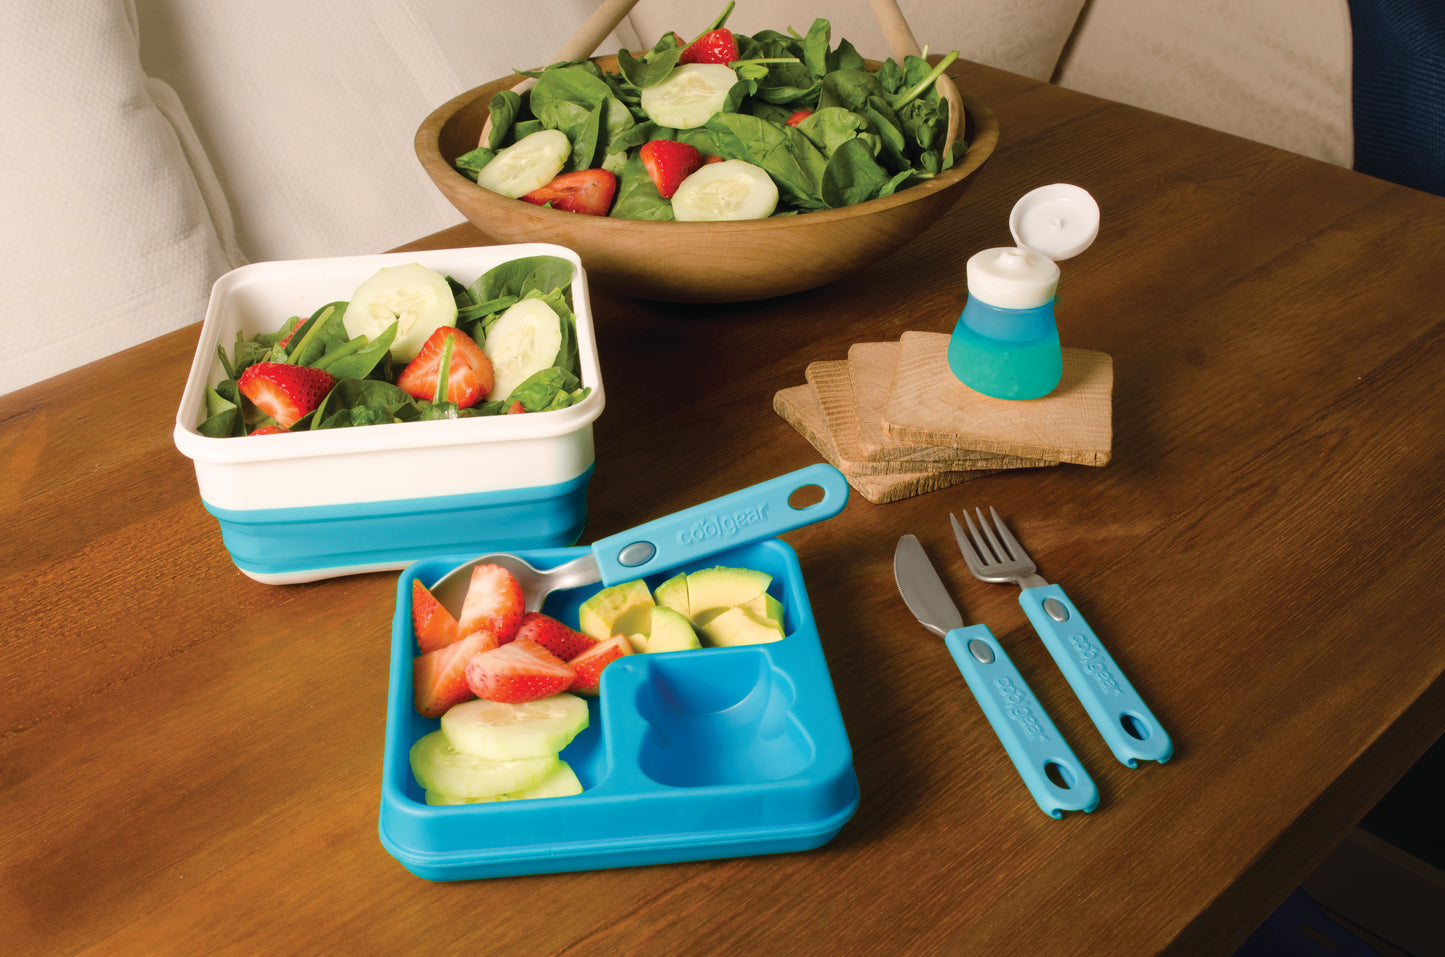 COOL GEAR 2-Pack Large Expandable To-Go Salad Kit Lunch Containers - Rectangle & Square - 52 oz Bowl with 3 Compartments for Salad Toppings and 2 oz Salad Dressing Bottle | Leakproof, Bento Meal Prep